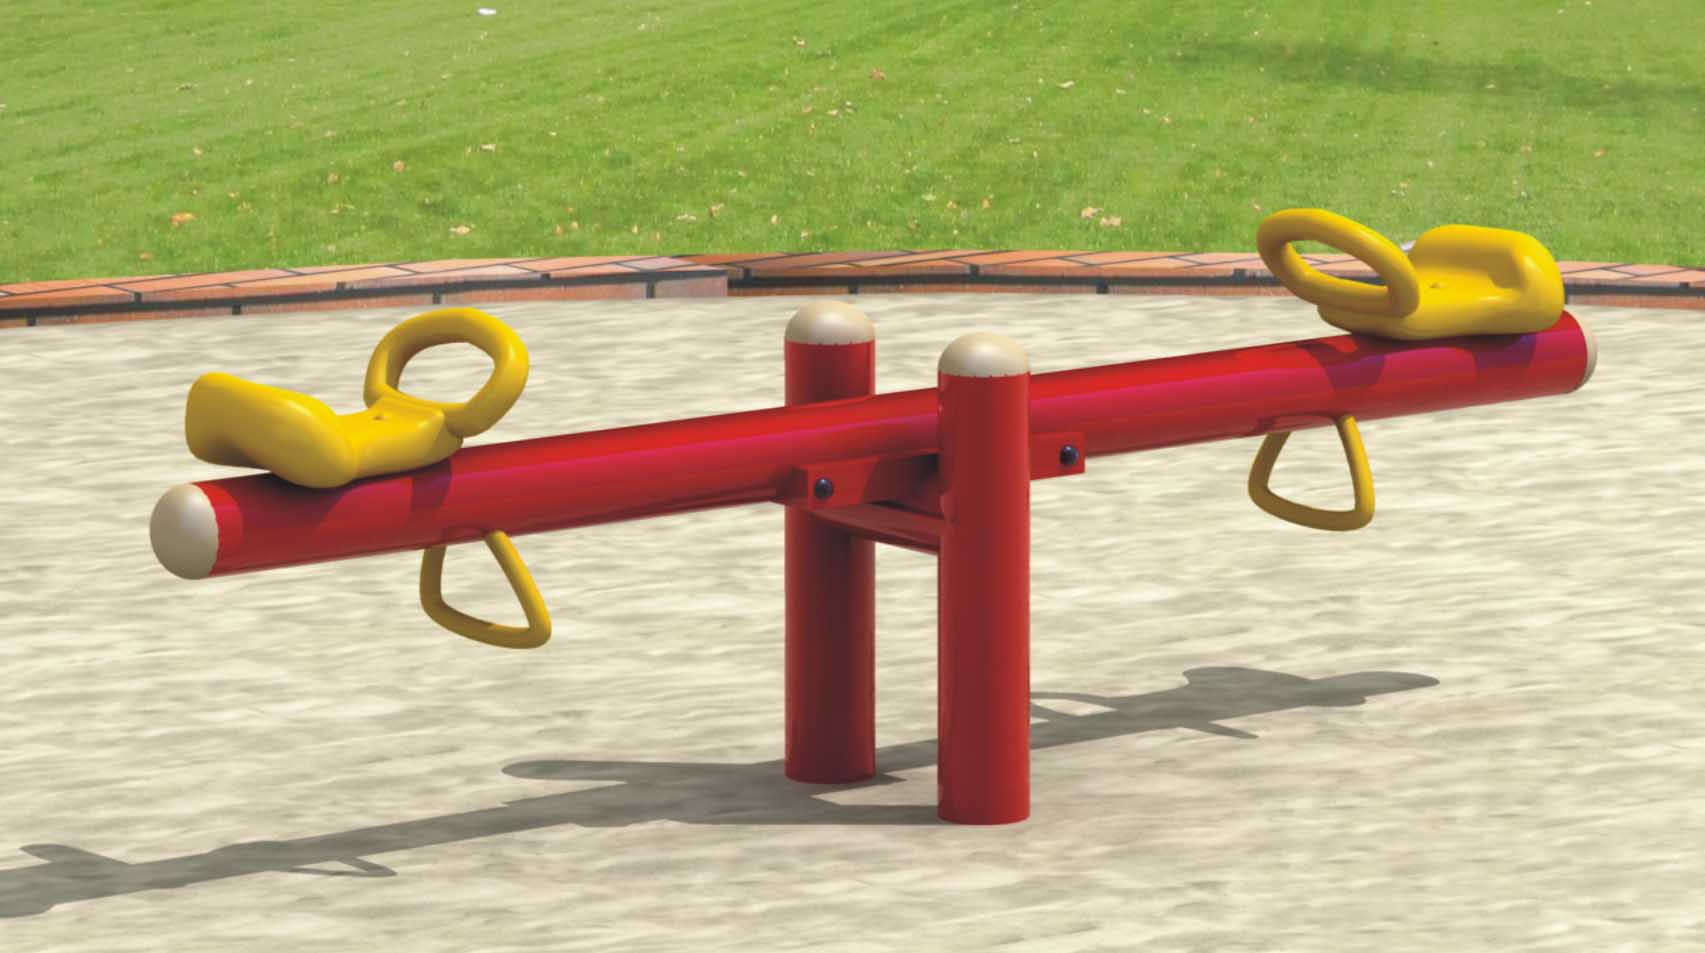 I loved seesaws as a kid.